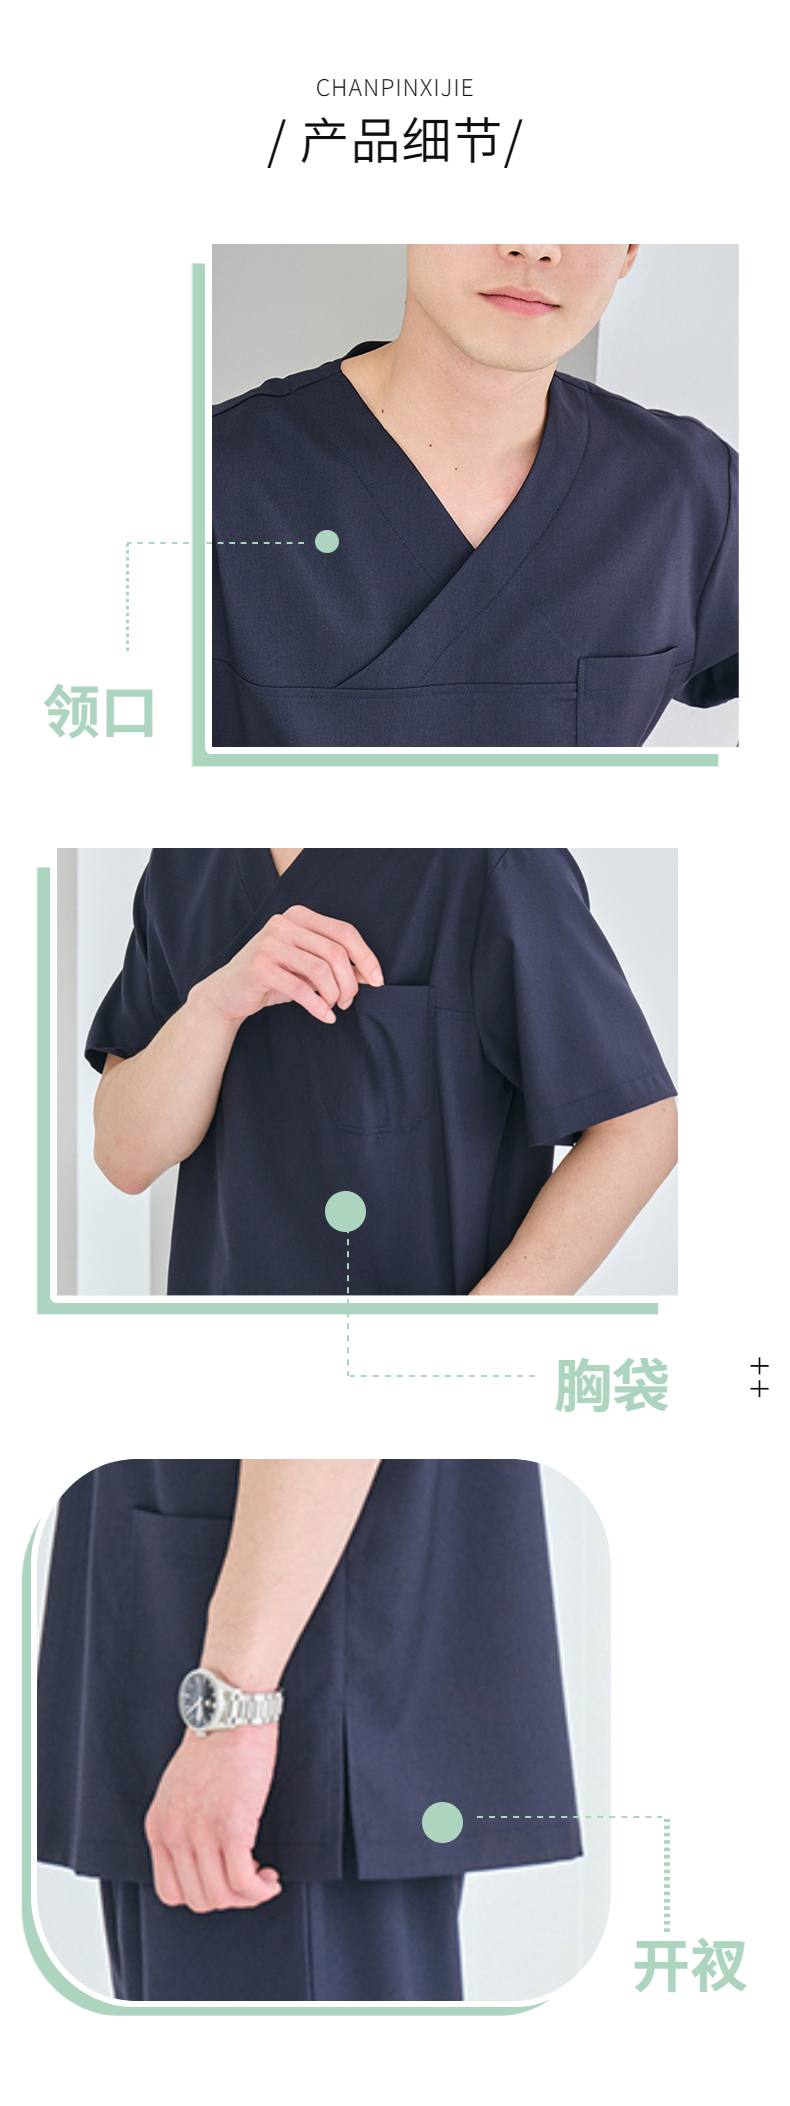 New operating room hand wash suit men's DZ008 short sleeved doctor's suit operating suit thin quick drying brush hand suit summer